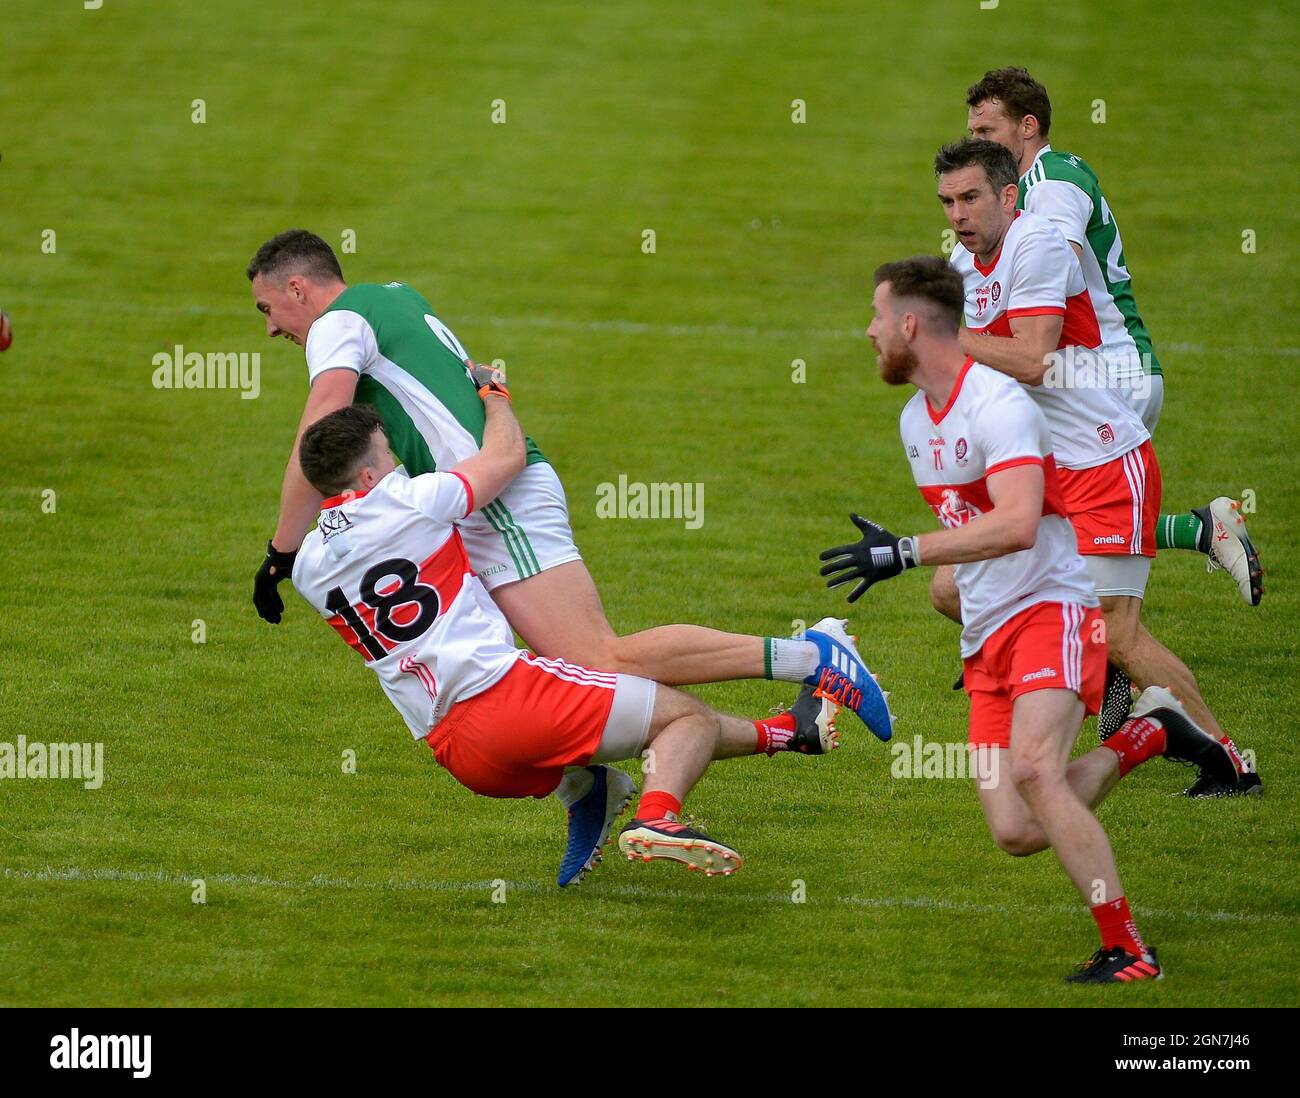 GAA football under 20 inter county game Derry (in red) v Fermanagh. ©George Sweeney / Alamy Stock Photo Stock Photo